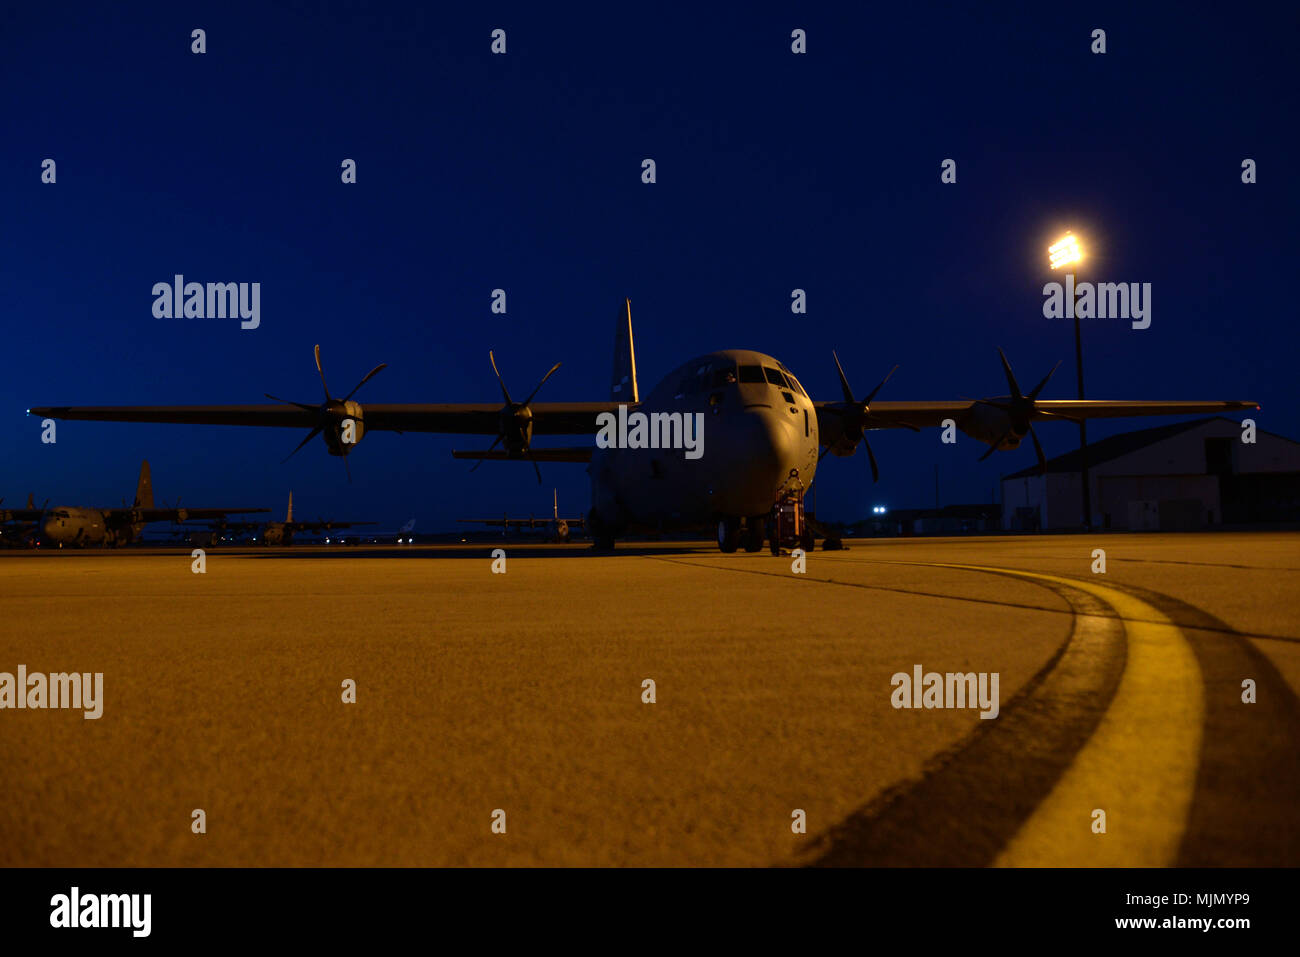 A U.S. Air Force C-130J Super Hercules assigned to Little Rock Air Force Base, Ark., prepares to taxi during the Joint Forcible Entry 17B on the flight line at Dyess Air Force Base, Texas, Dec. 9, 2017. During the U.S. Air Force Weapons School JFE 17B, the students flying and decision-making skills are tested in the execution of various missions over the Nevada Test and Training Range. (U.S. Air Force photo by Airman River Bruce) Stock Photo